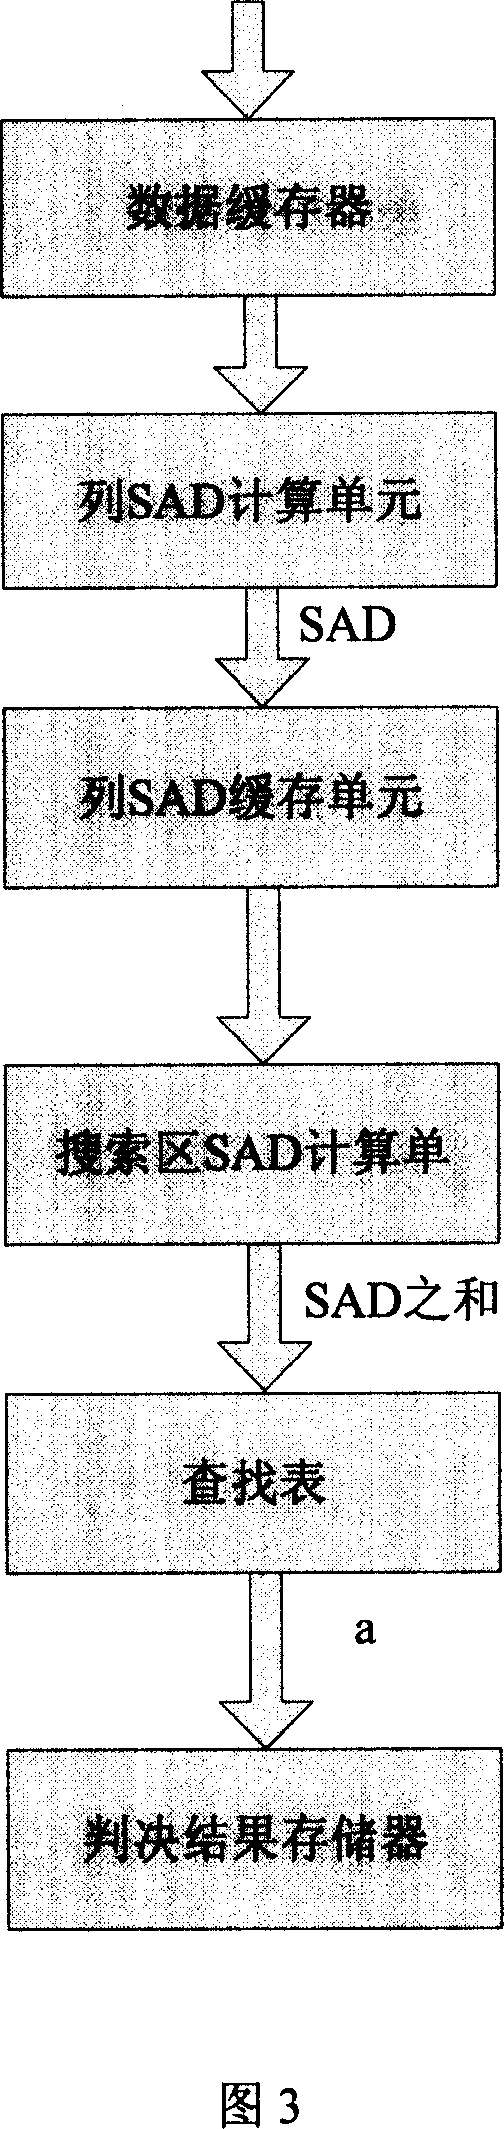 De-interlacing method with the motive detection and self-adaptation weight filtering